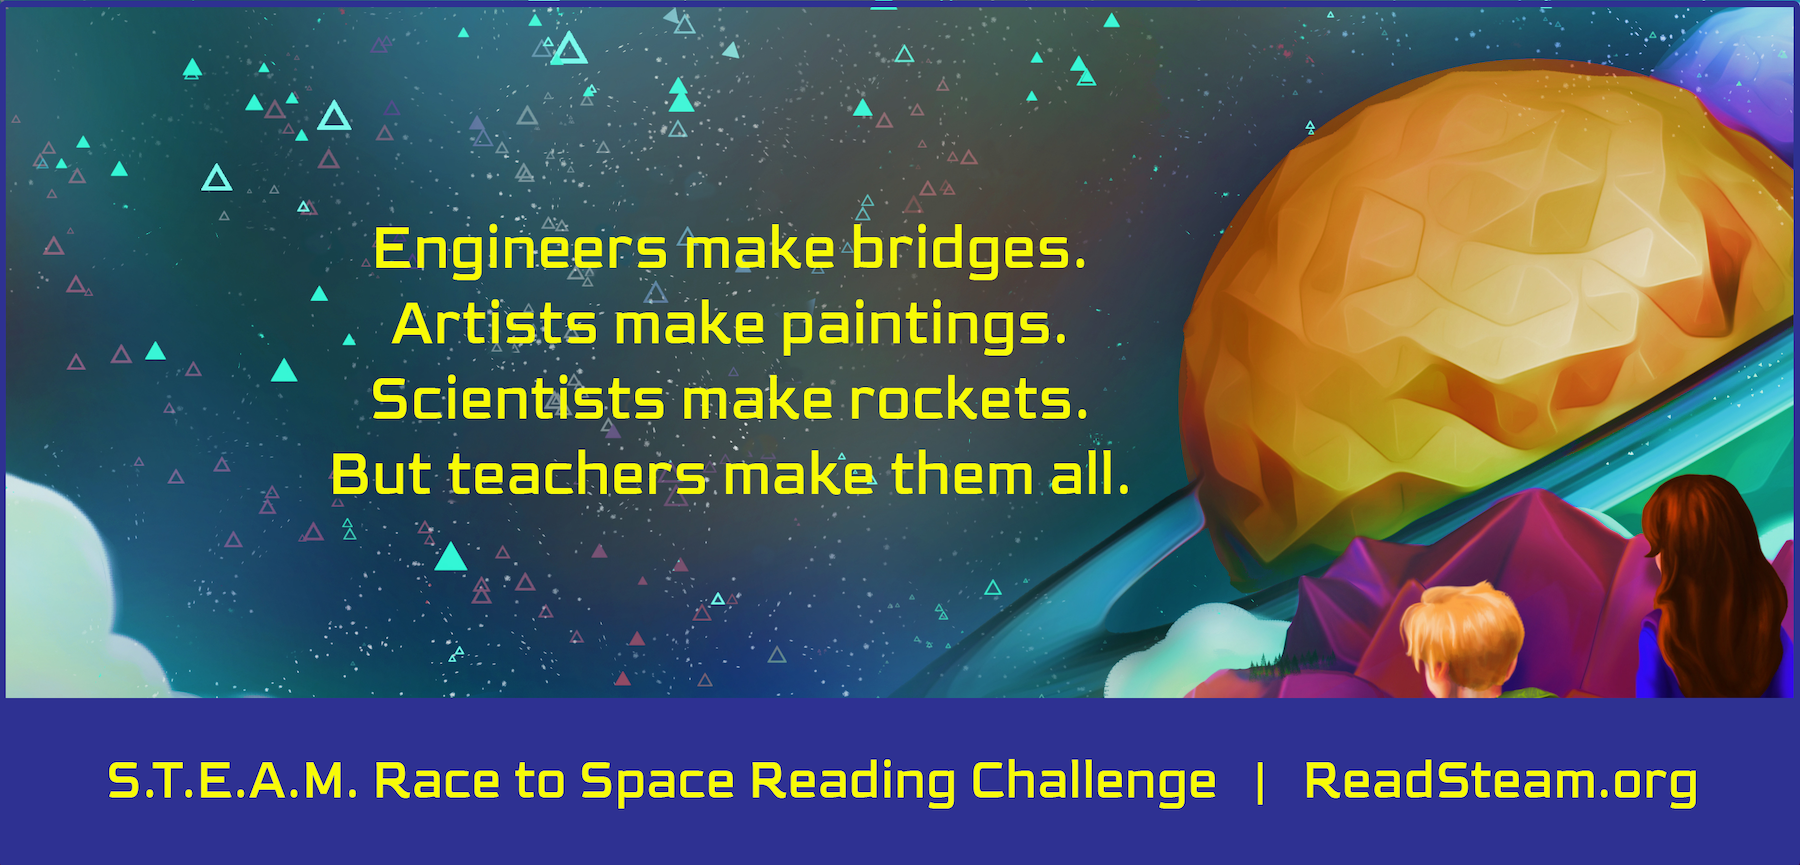 Inspiring quote against space background: Engineers make bridges. Artists make paintings. Scientists make rockets. But teachers make them all.